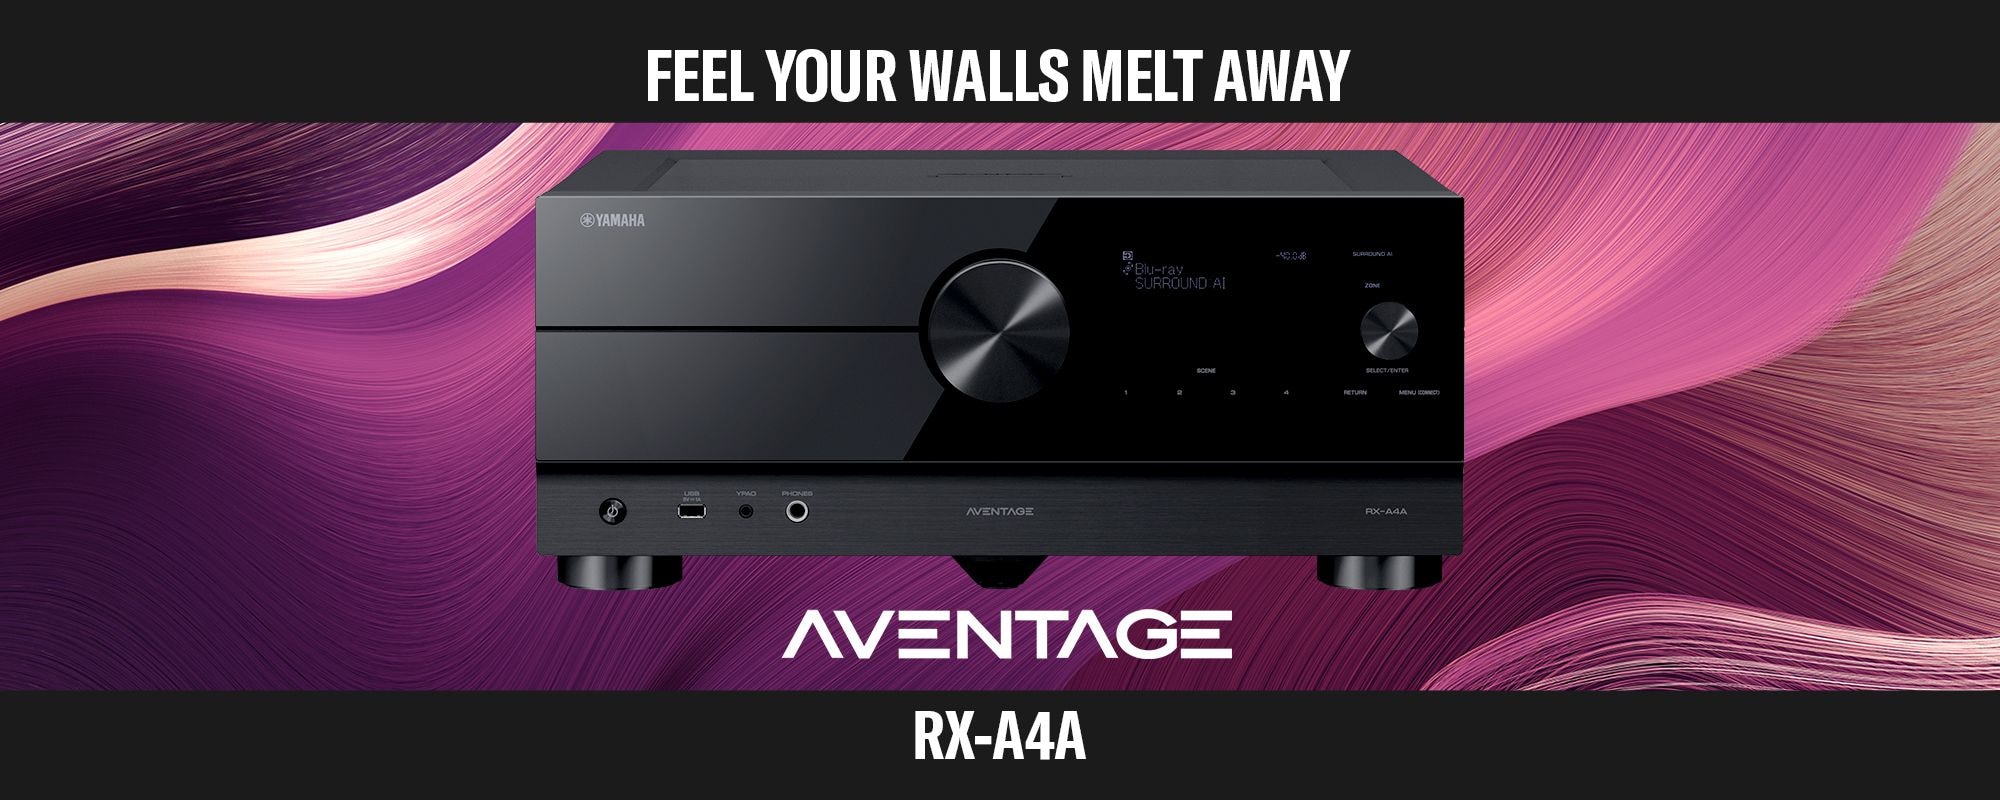 Feel Your Walls Melt Away - Yamaha AVENTAGE RX-A4A 7.2-Channel AV Receiver with 8K HDMI and …